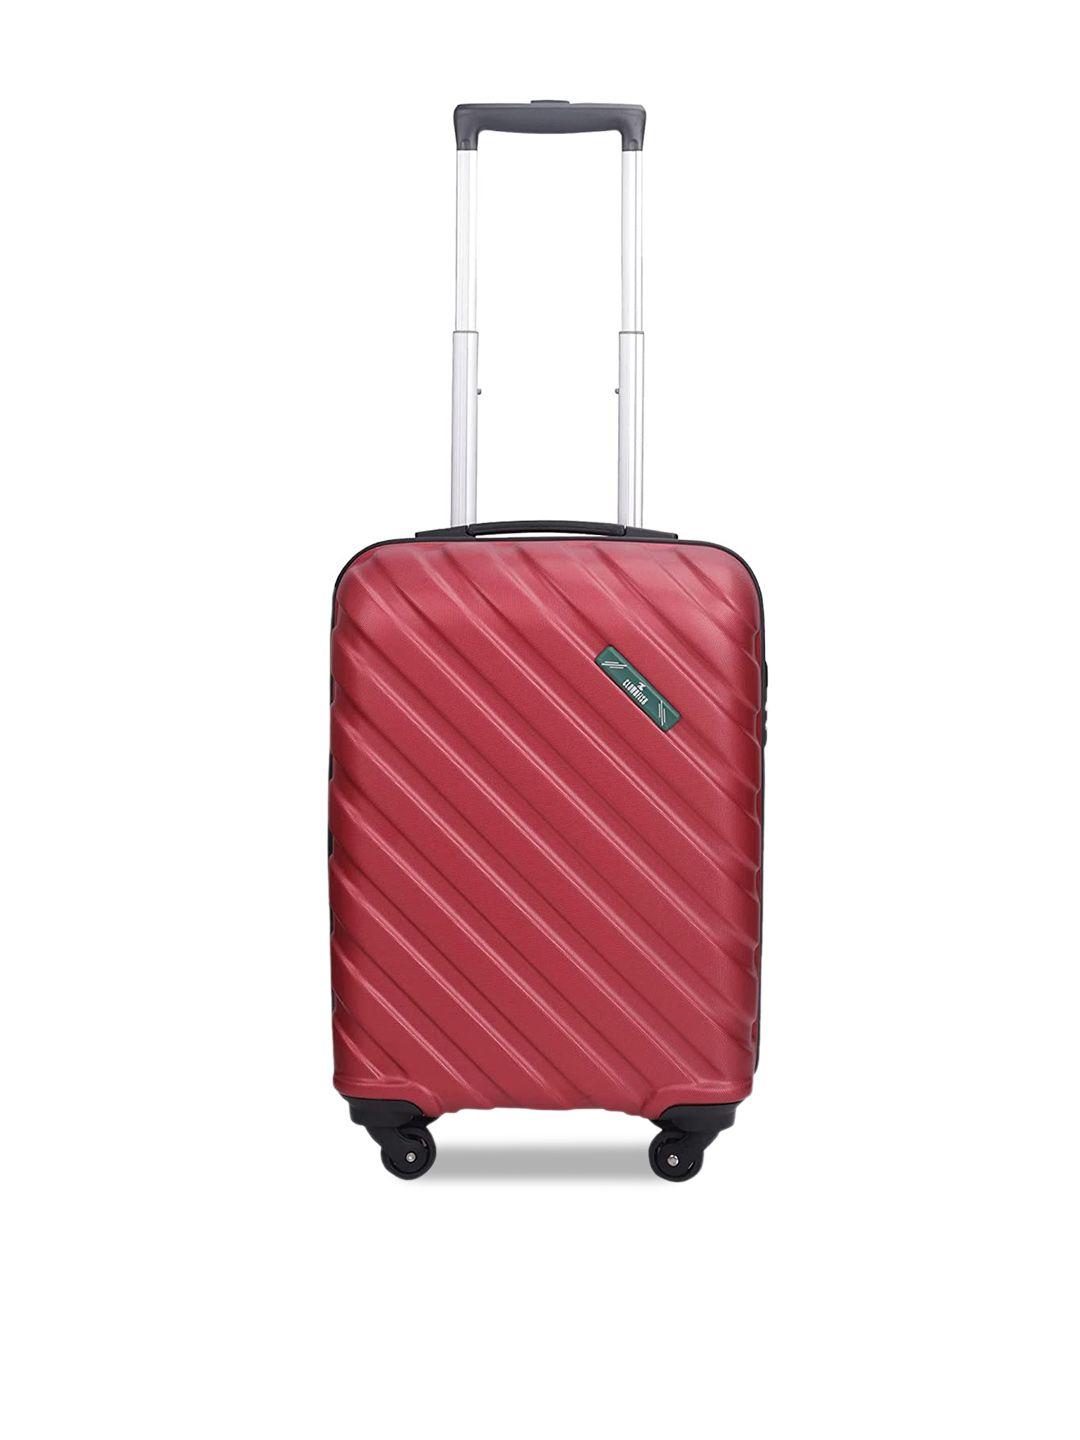 the clownfish textured hard sided small trolley suitcase